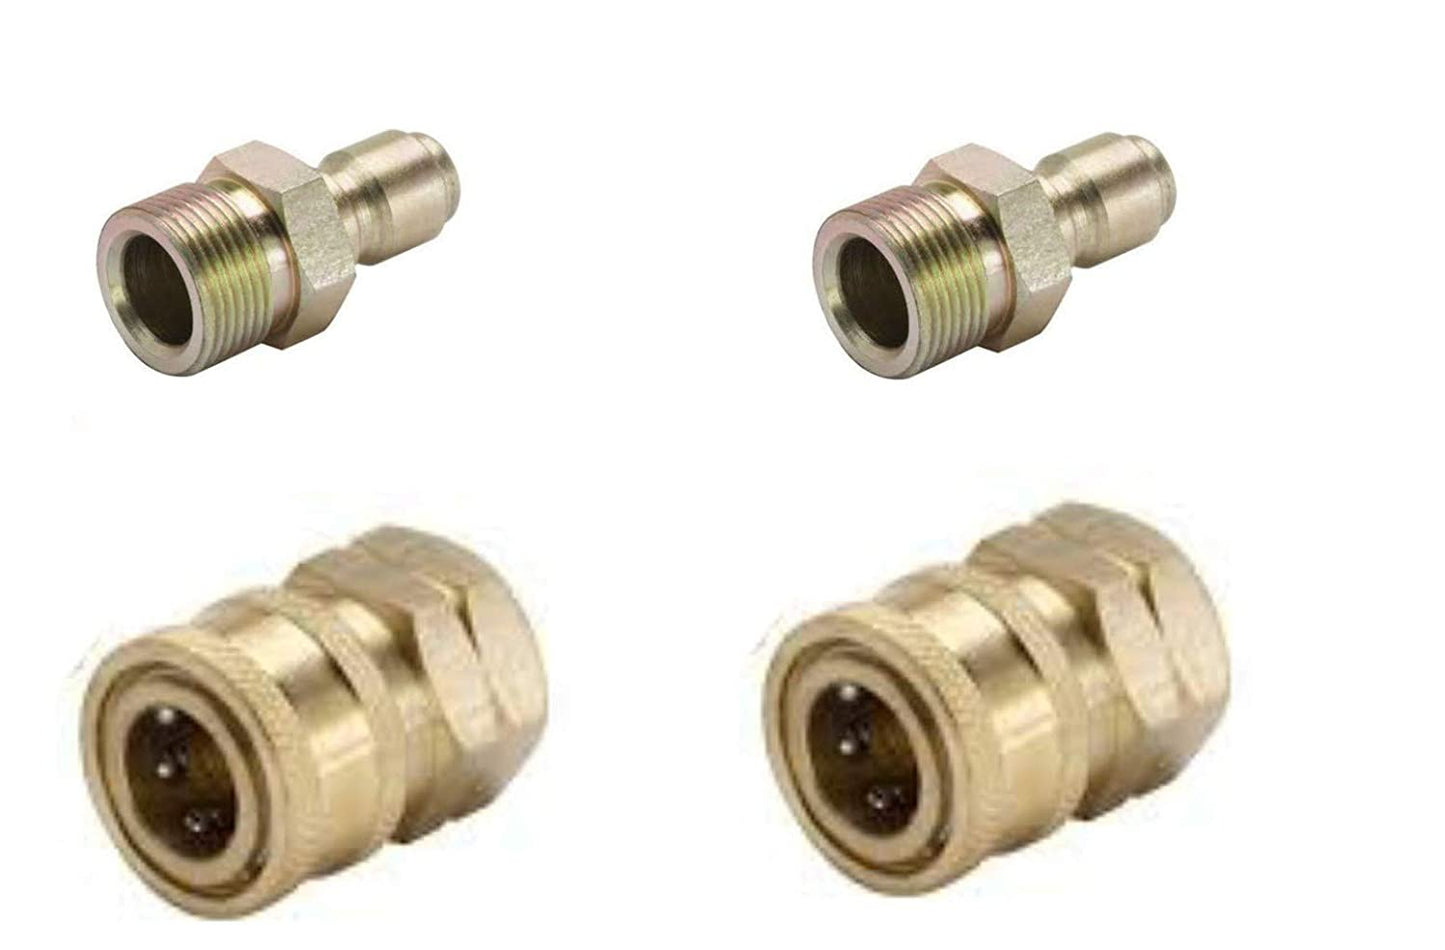 STARQ 2 QD SETS Quick Connect Adapter Fittings for Pressure Washer Hose Pipe M22 x 15 (Set of 2 Male and 2 Female)